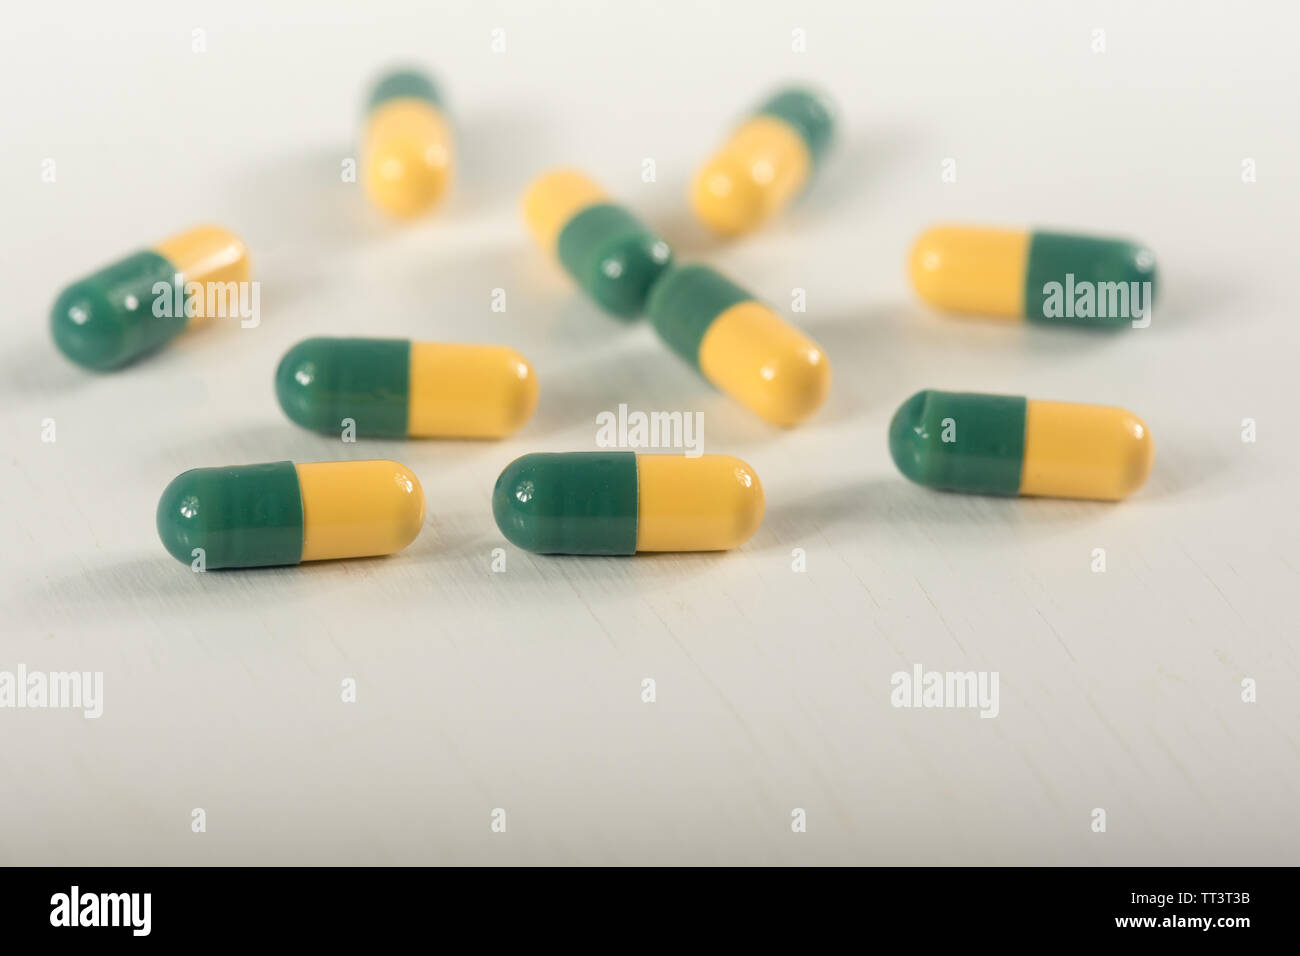 Green, yellow tramadol capsule pills on white background.Pain killer capsules called 'Tramadol HCL'.The medicine for pain relive. Stock Photo